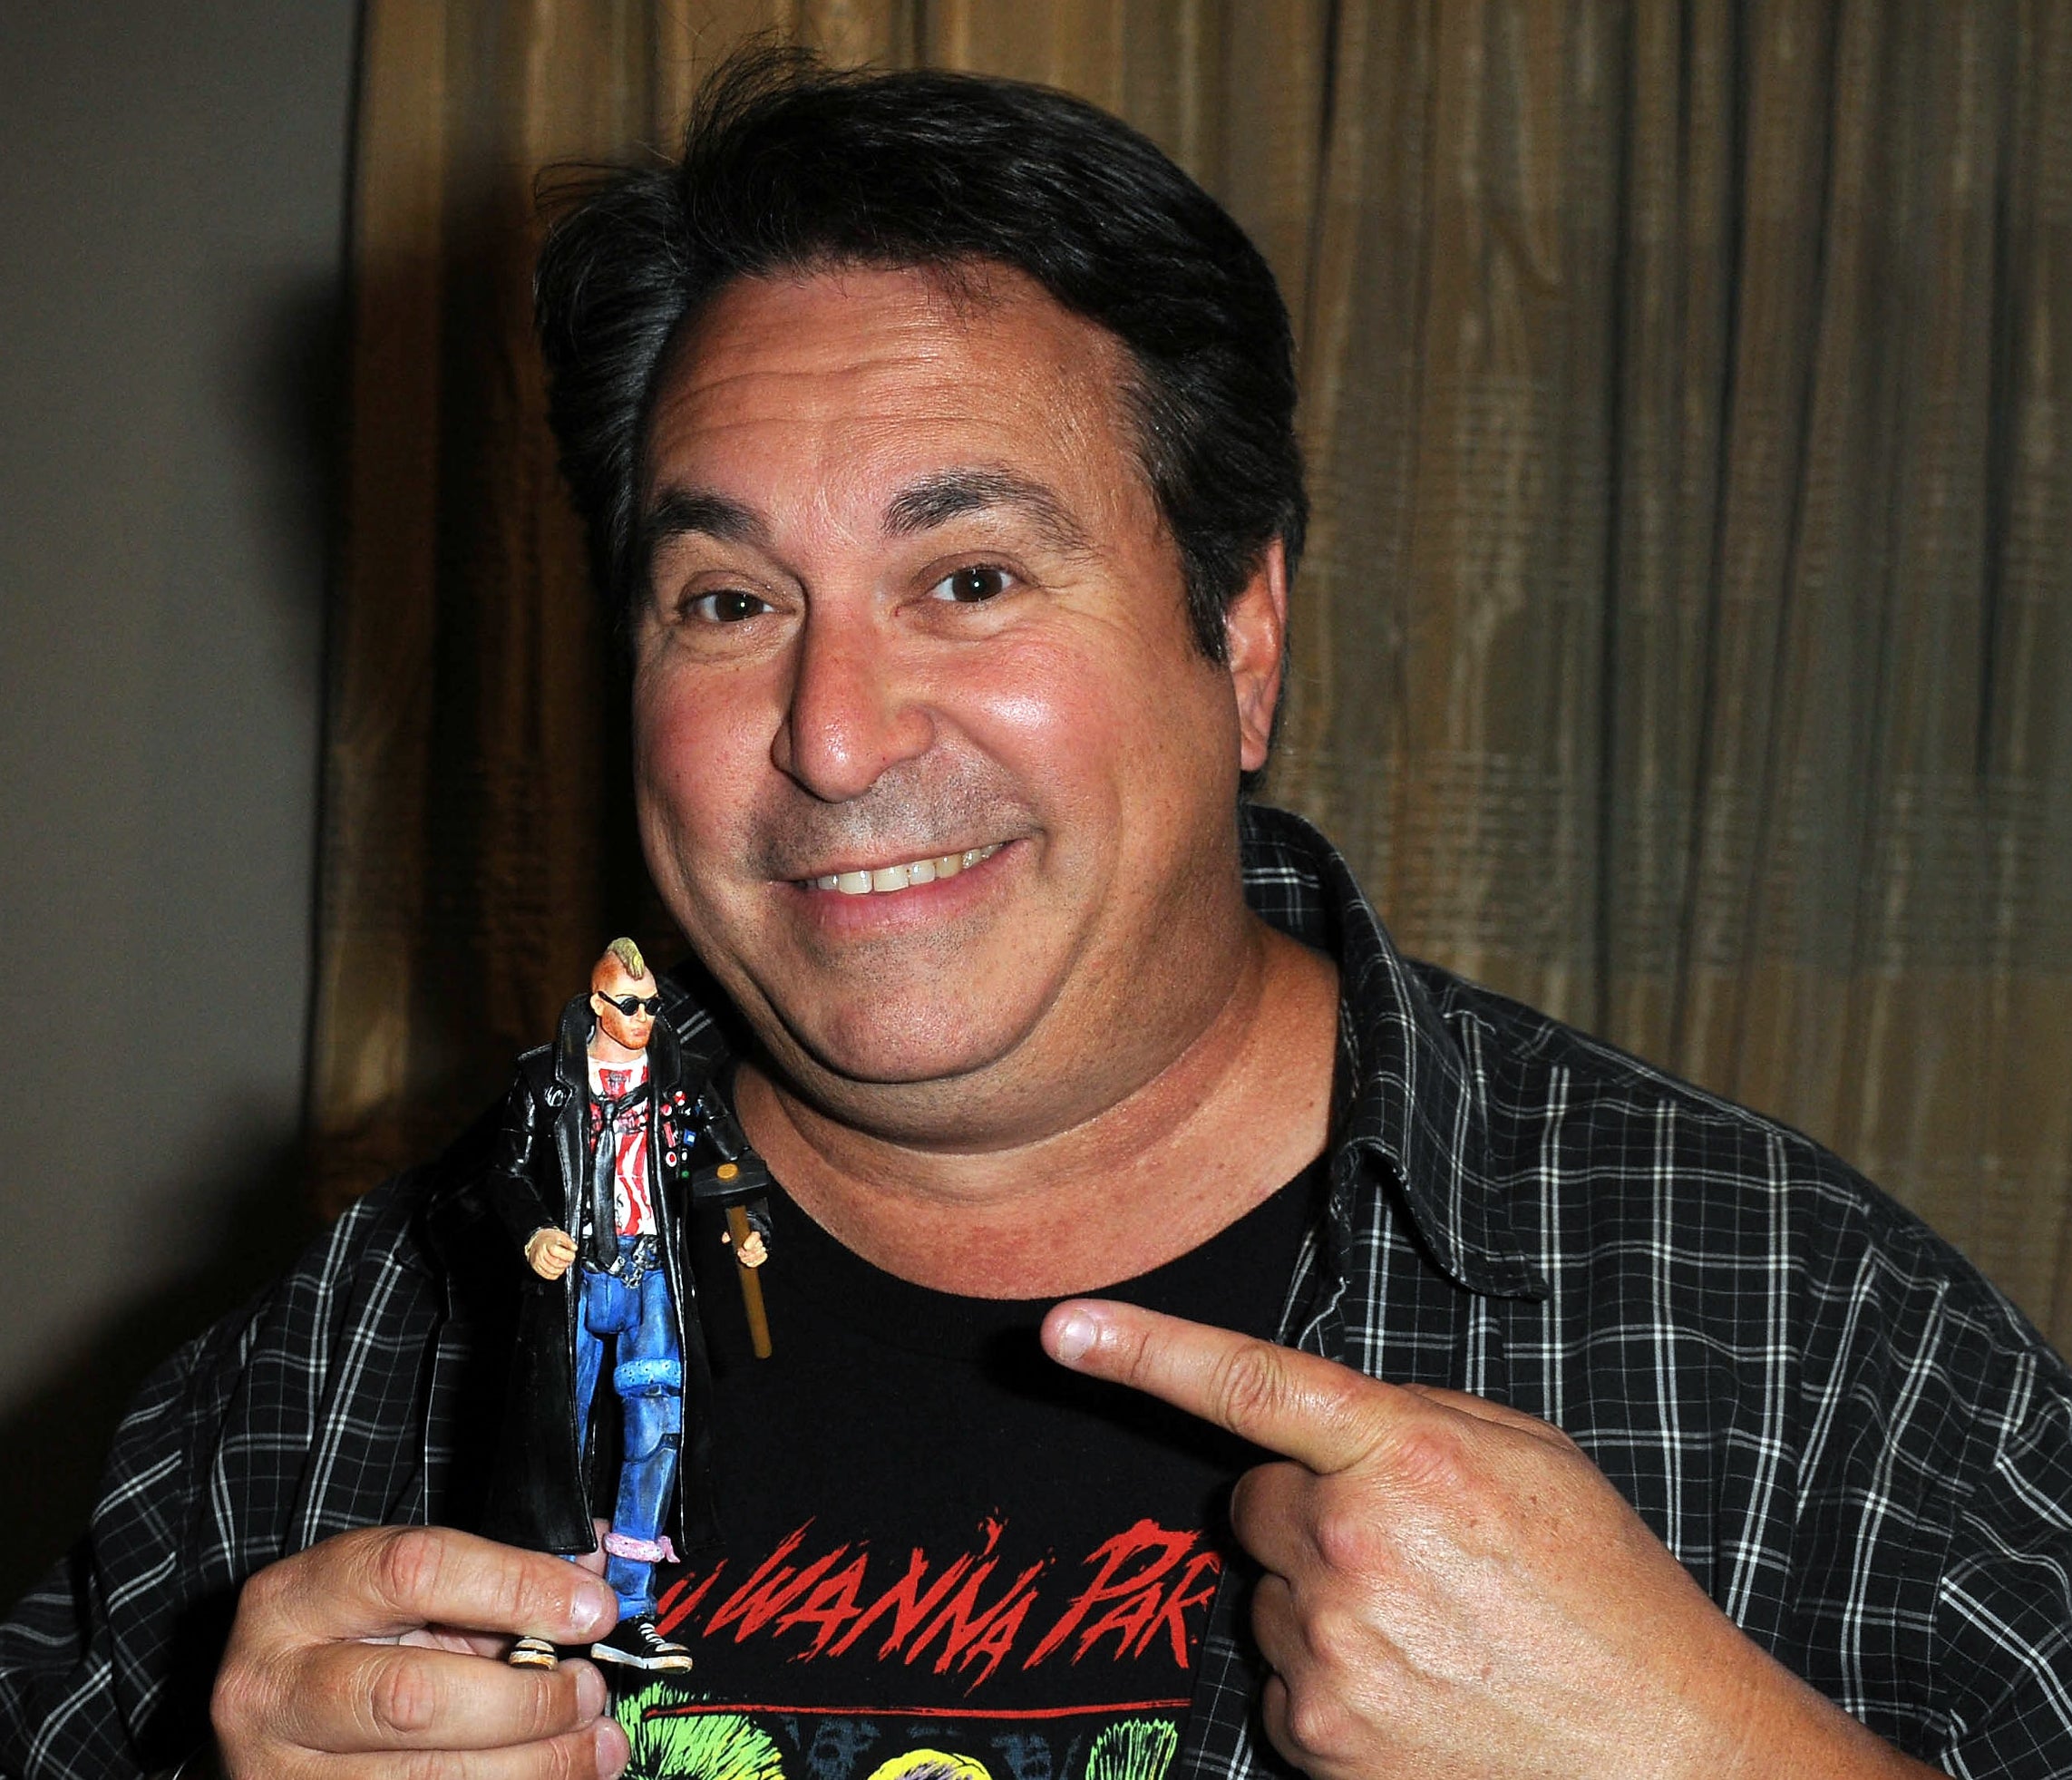 Brian Peck smiling and holding and pointing to a figurine